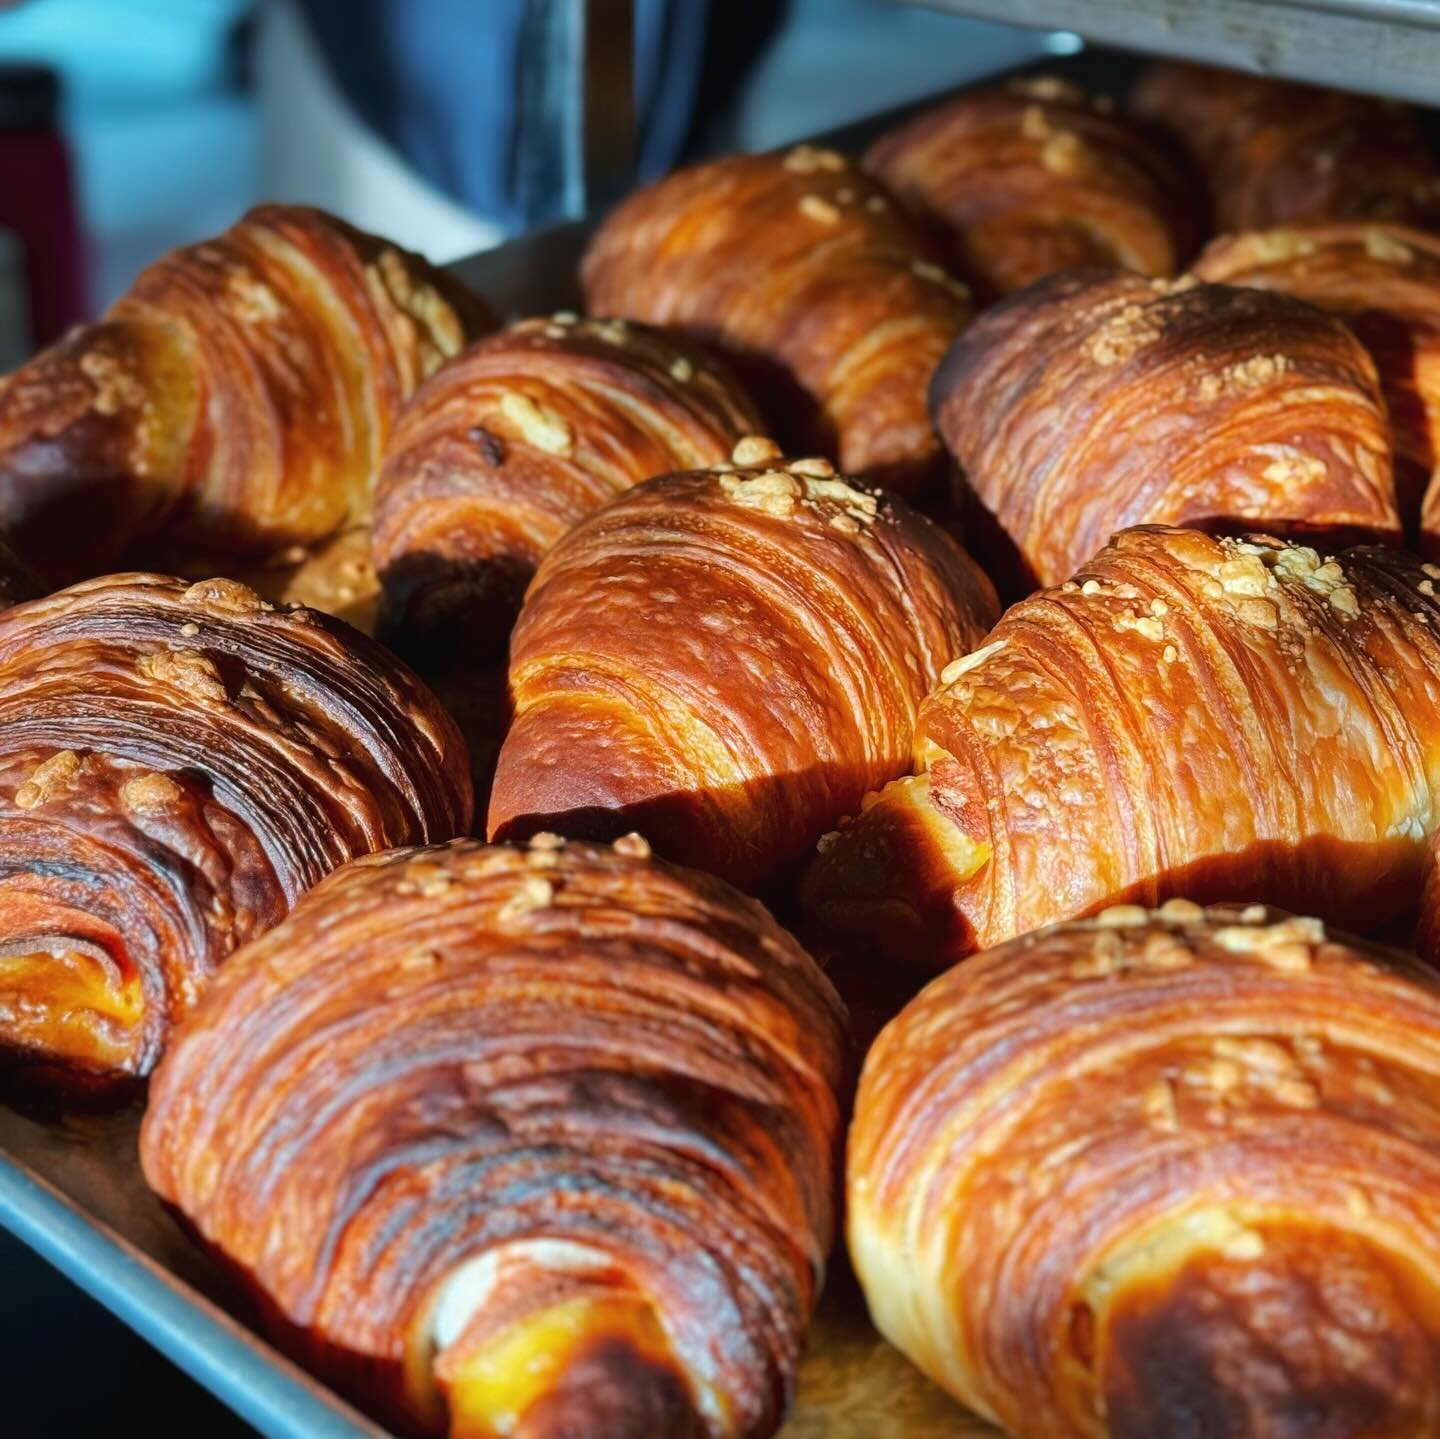 HAM AND CHEESE CROISSANTS 🧀🥐
What makes these pastries one of our favourite items and beloved bestseller is the perfect combination of their flaky, buttery layers, encasing a soft and cheesy center 😍 A staple on the Bel&eacute;n menu since our hum